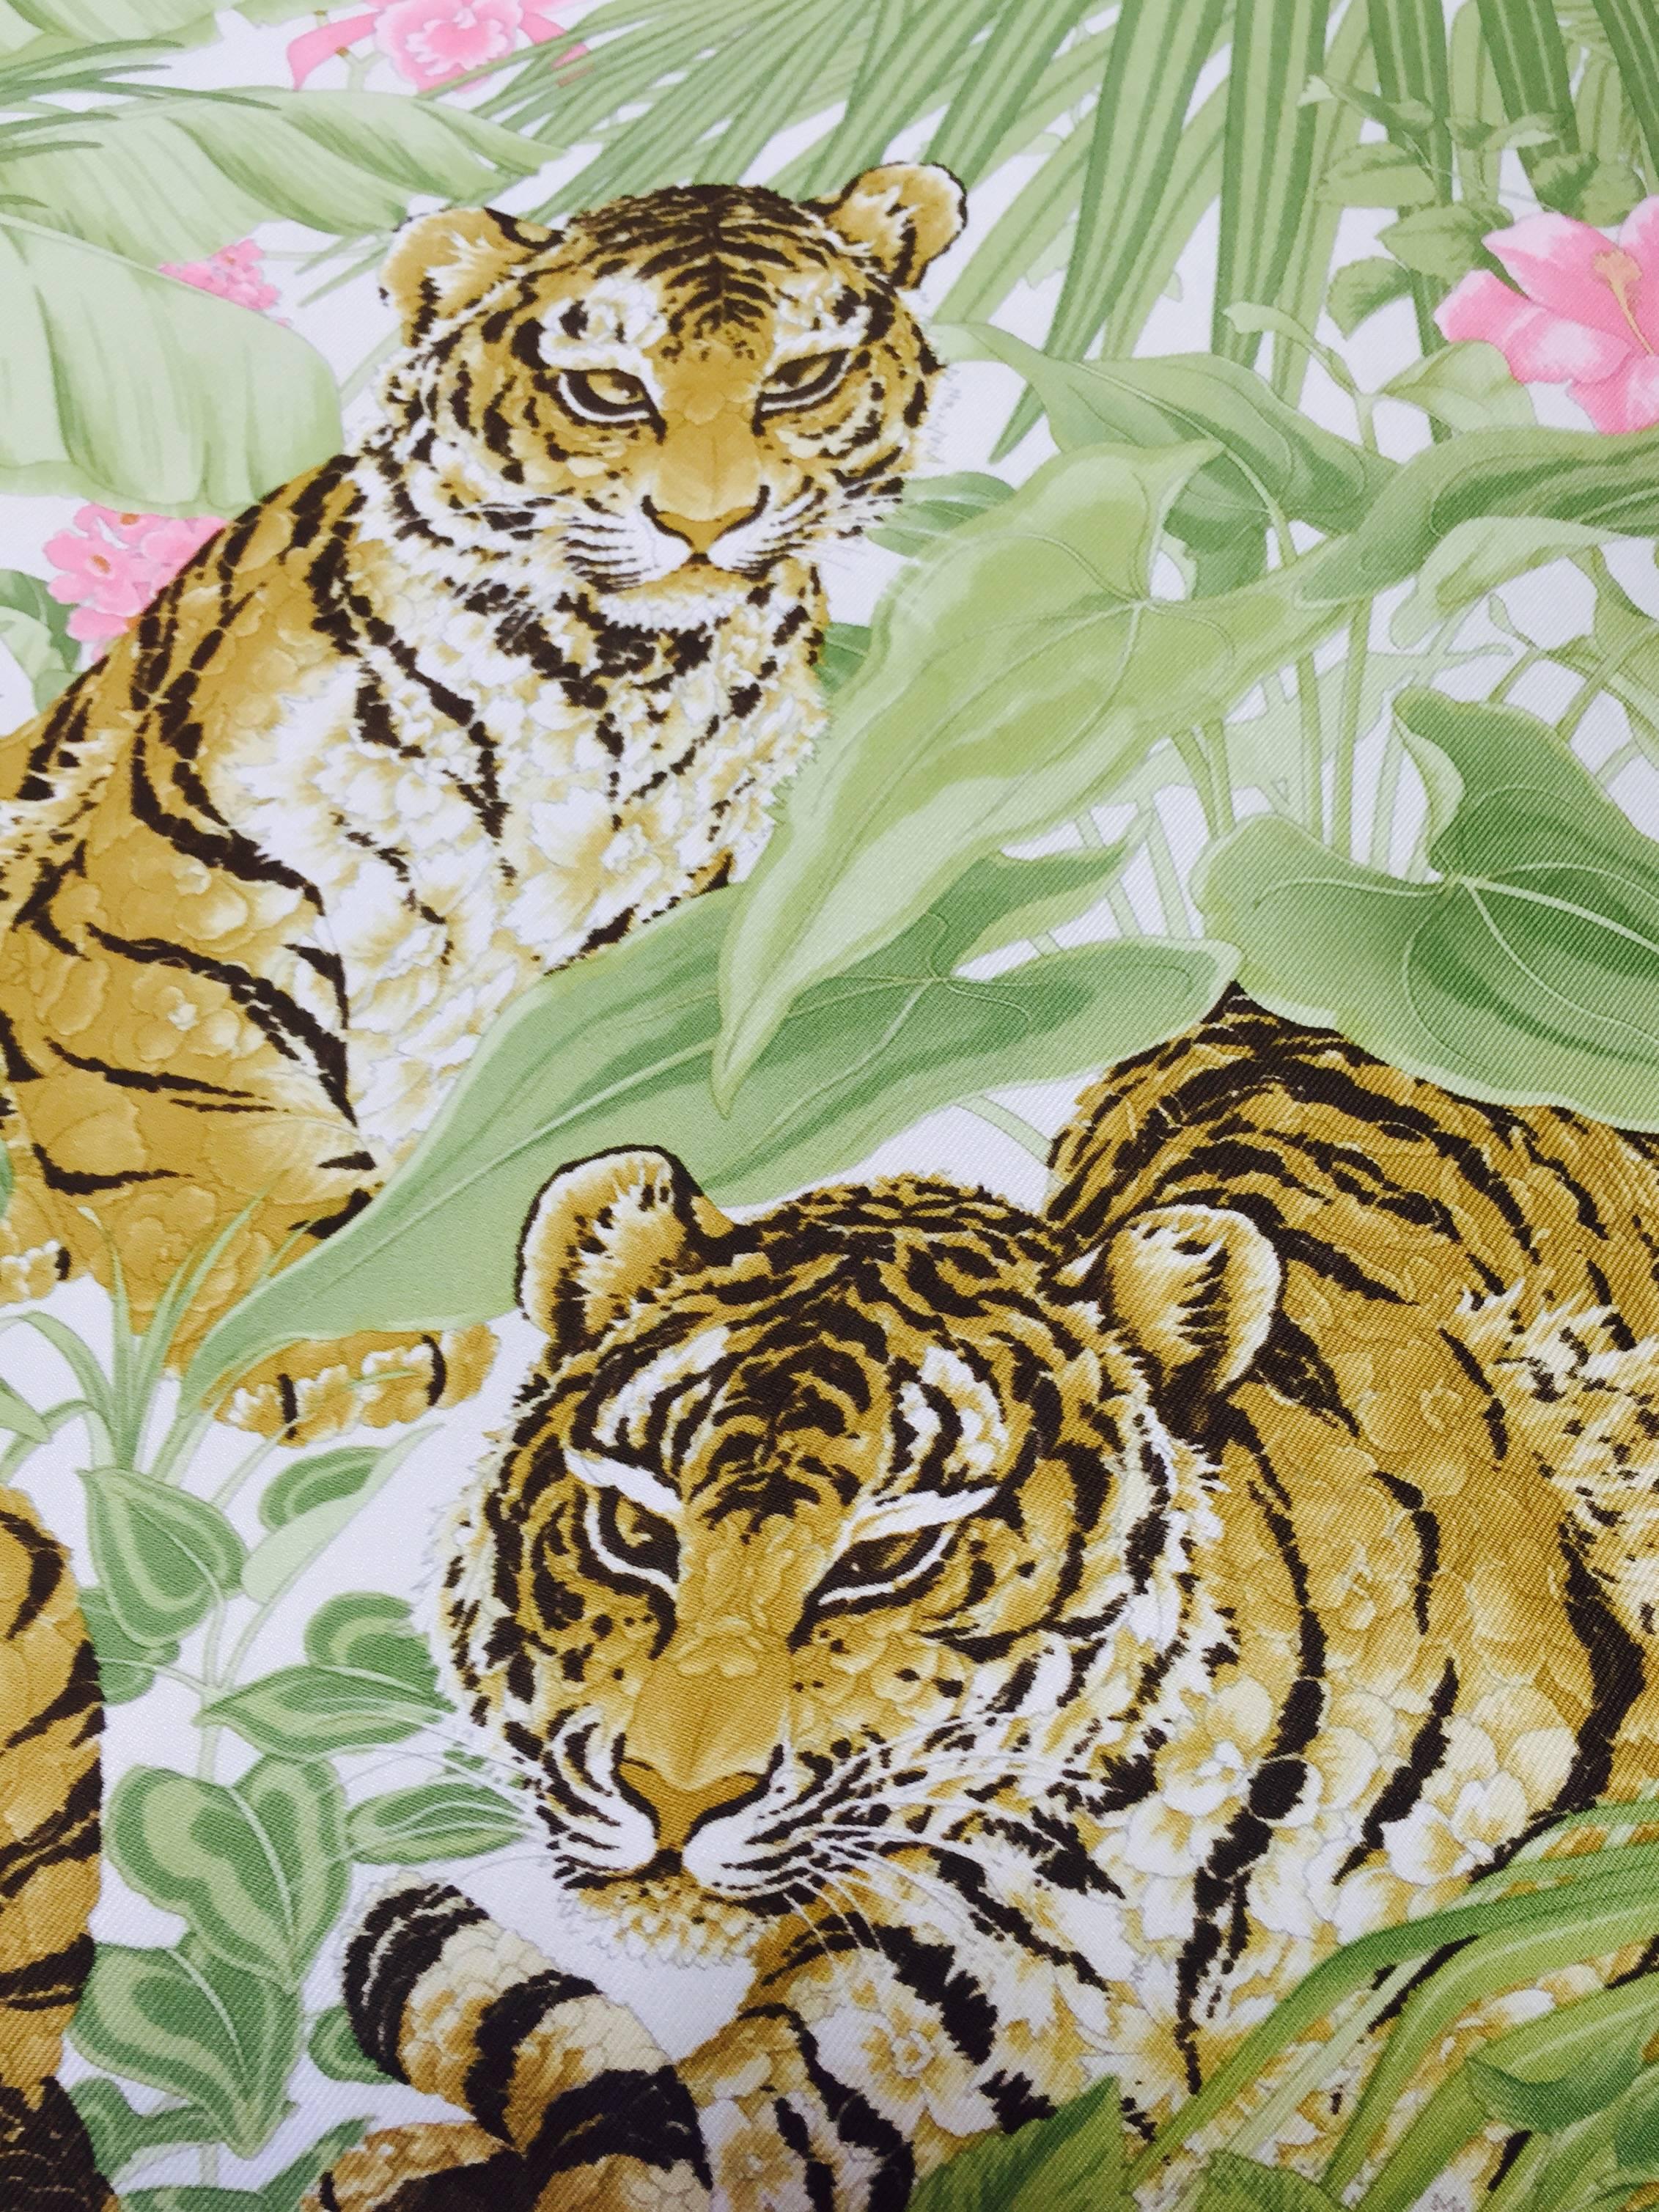 Salvatore Ferragamo Silk Pillow is the ultimate in luxurious home accessories!  Like Ferragamo scarves, pillow is crafted from ultra-luxurious silk twill print fabric.  The print?  Three lounging tigers surrounded by lush jungle and beautiful pink